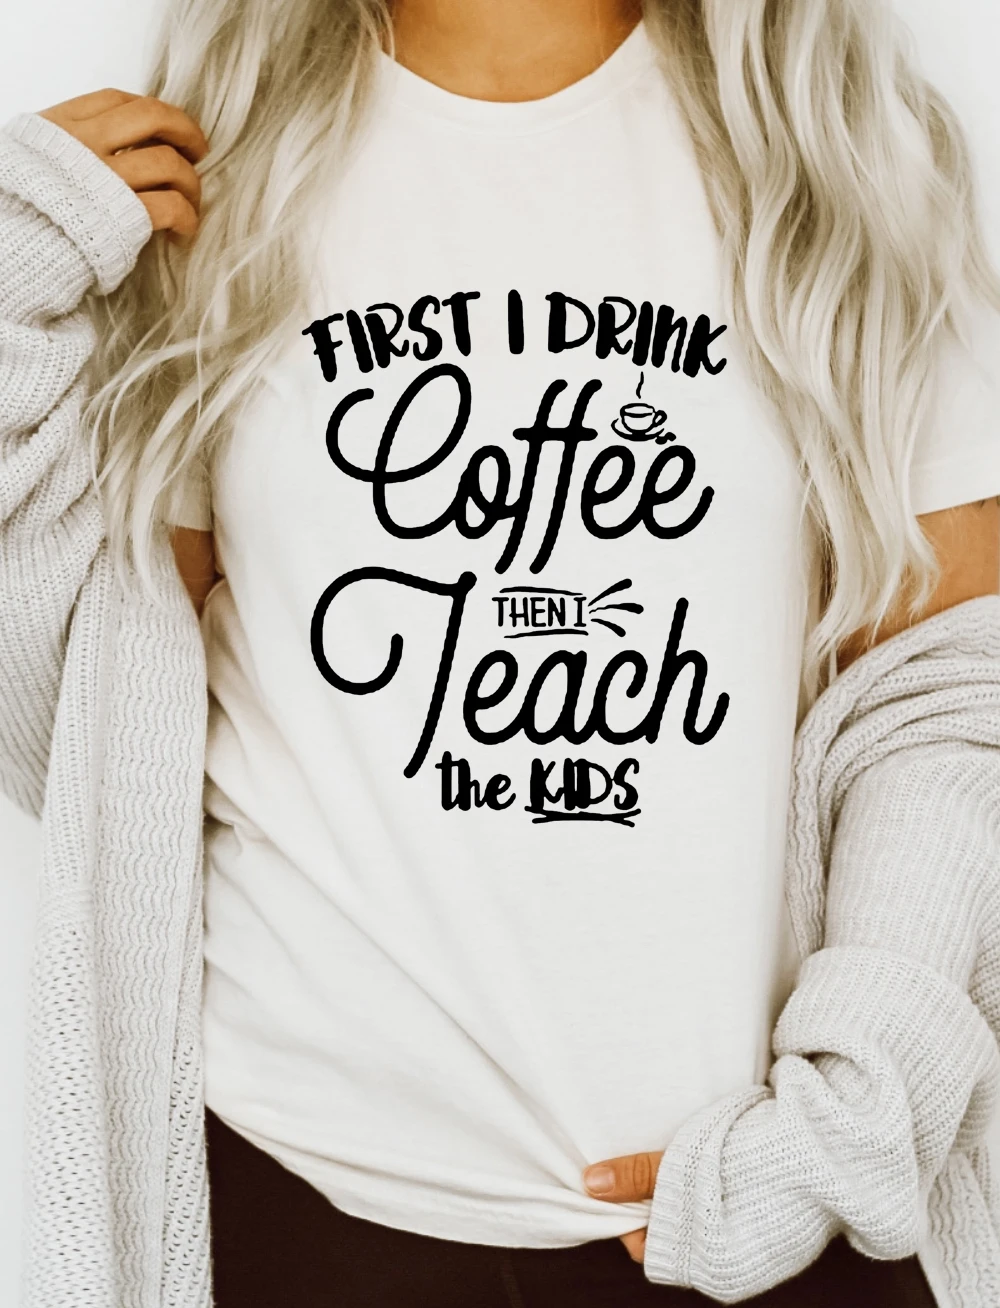 

First Coffee Then Teach Print Women Teacher Slogan T-shirt Gift Aesthetic Vintage Tops Female Casual Tees Clothes Ropa De Mujer